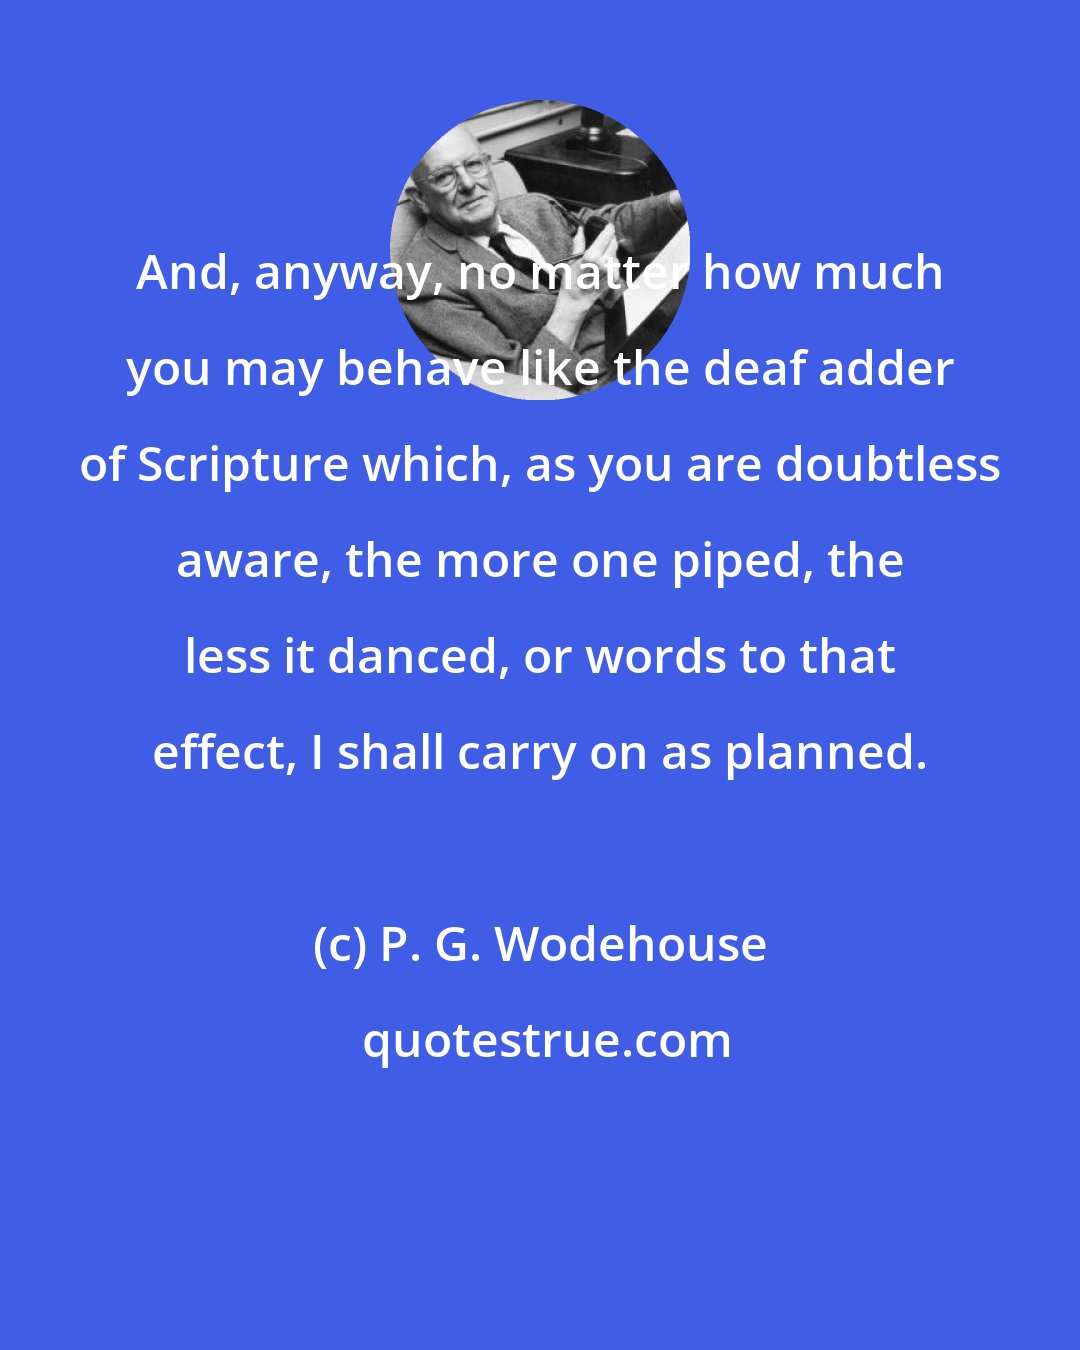 P. G. Wodehouse: And, anyway, no matter how much you may behave like the deaf adder of Scripture which, as you are doubtless aware, the more one piped, the less it danced, or words to that effect, I shall carry on as planned.